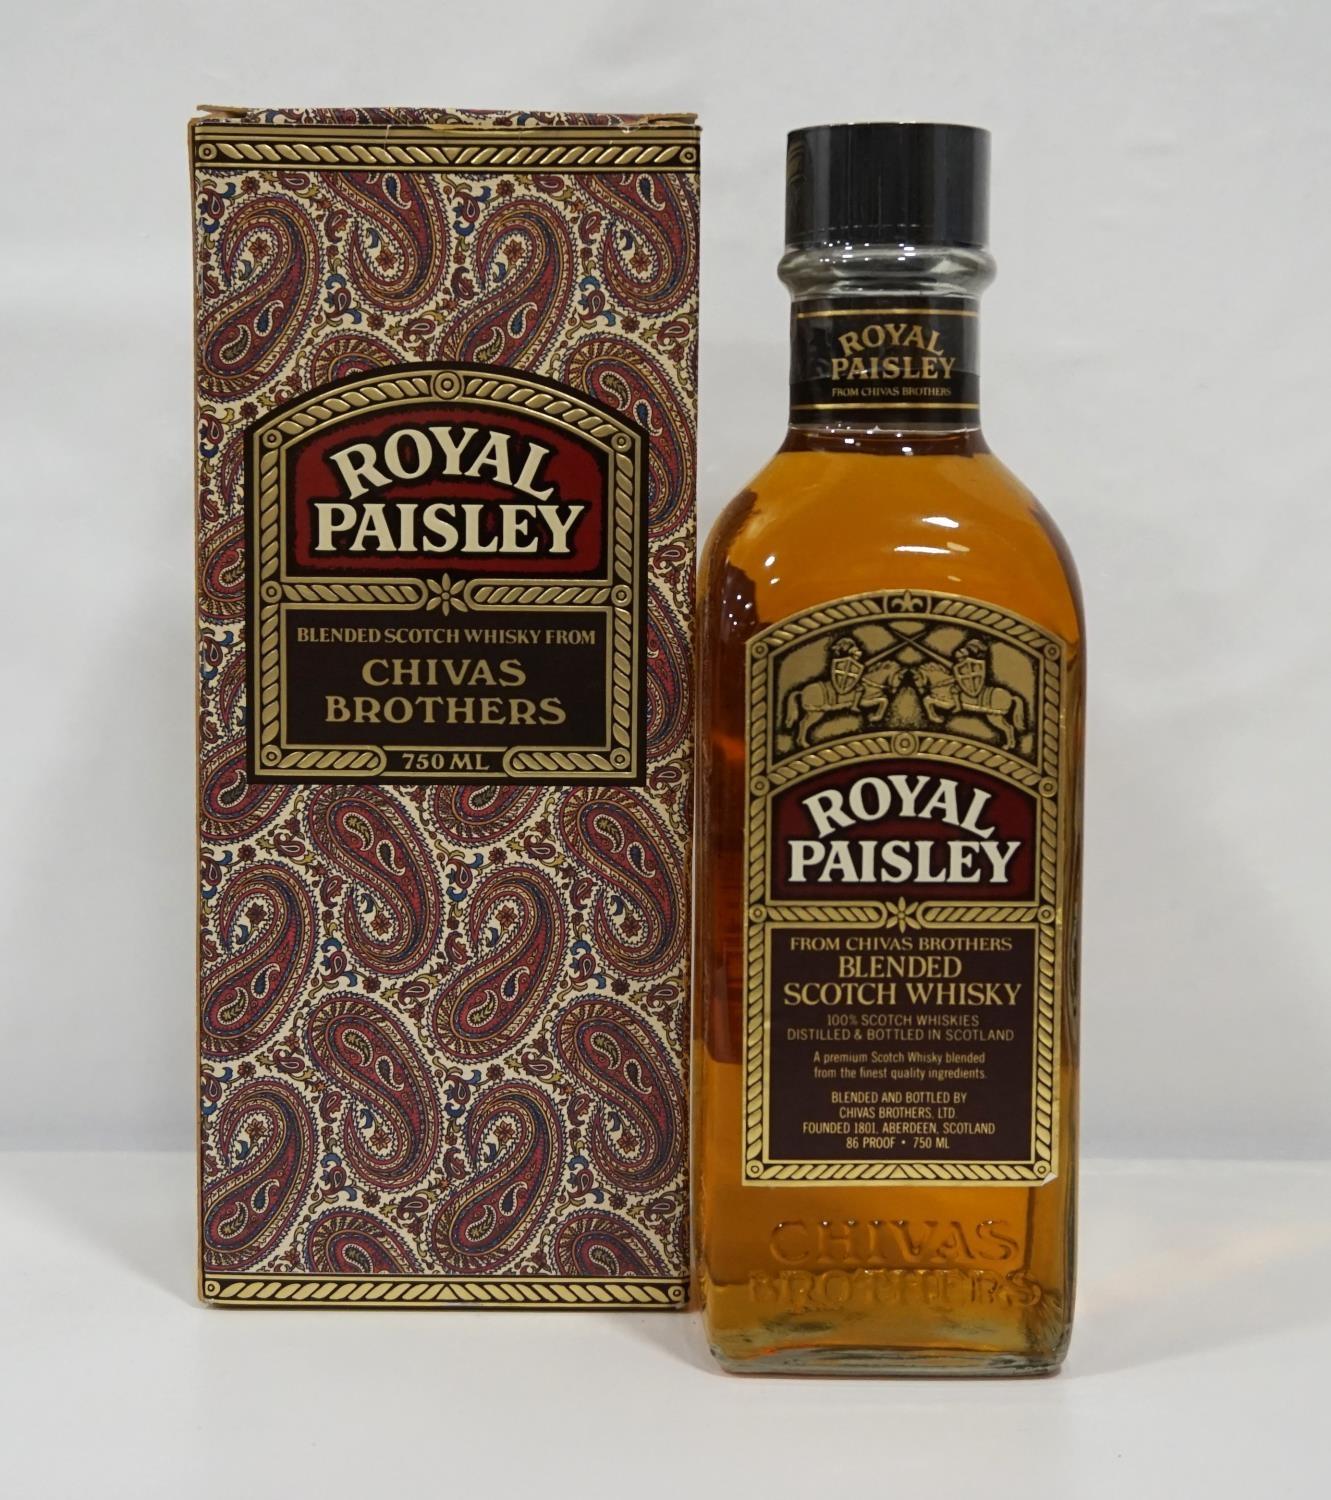 ROYAL PAISLEY A rare bottle of Royal Paisley Blended Scotch Whisky from Chivas Brothers released